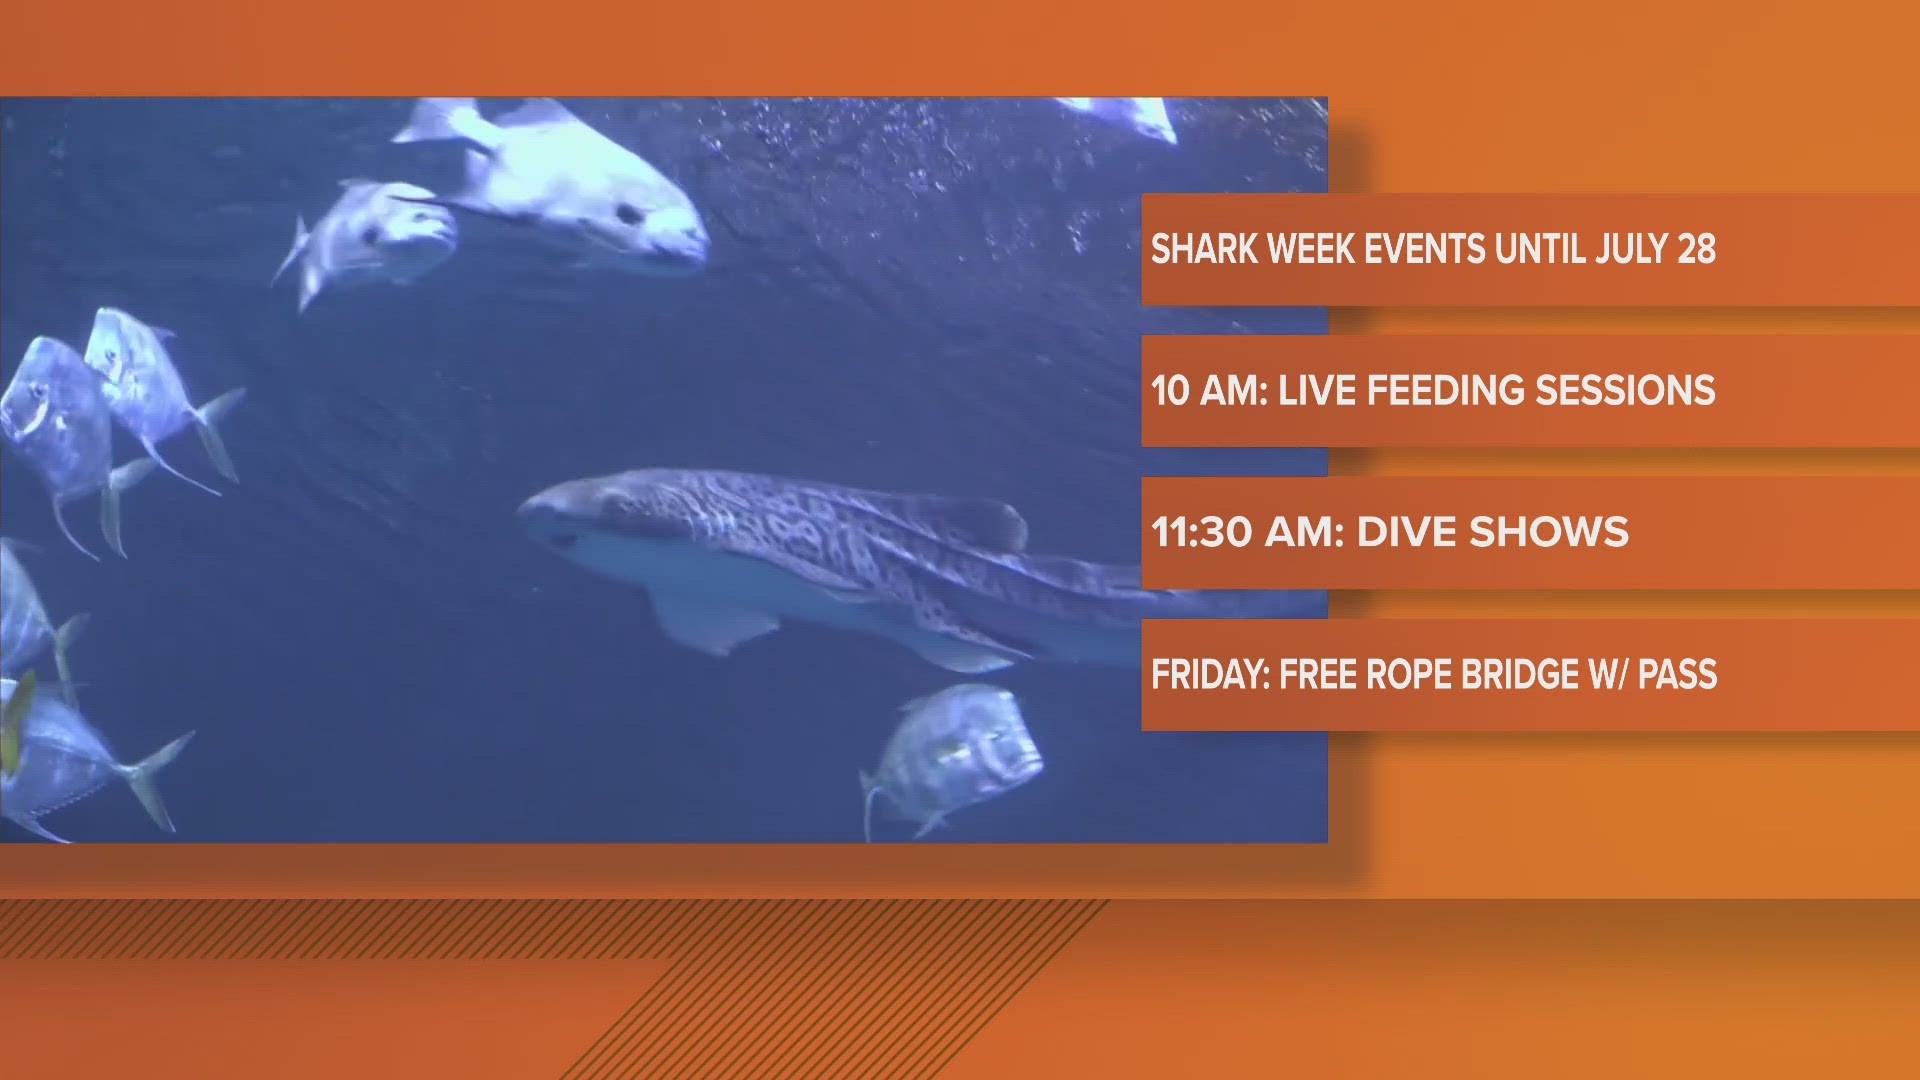 The Saint Louis Aquarium is taking a bit out of Shark Week with tons of shark-themed activities to help guests learn more about the ocean's most popular predators.